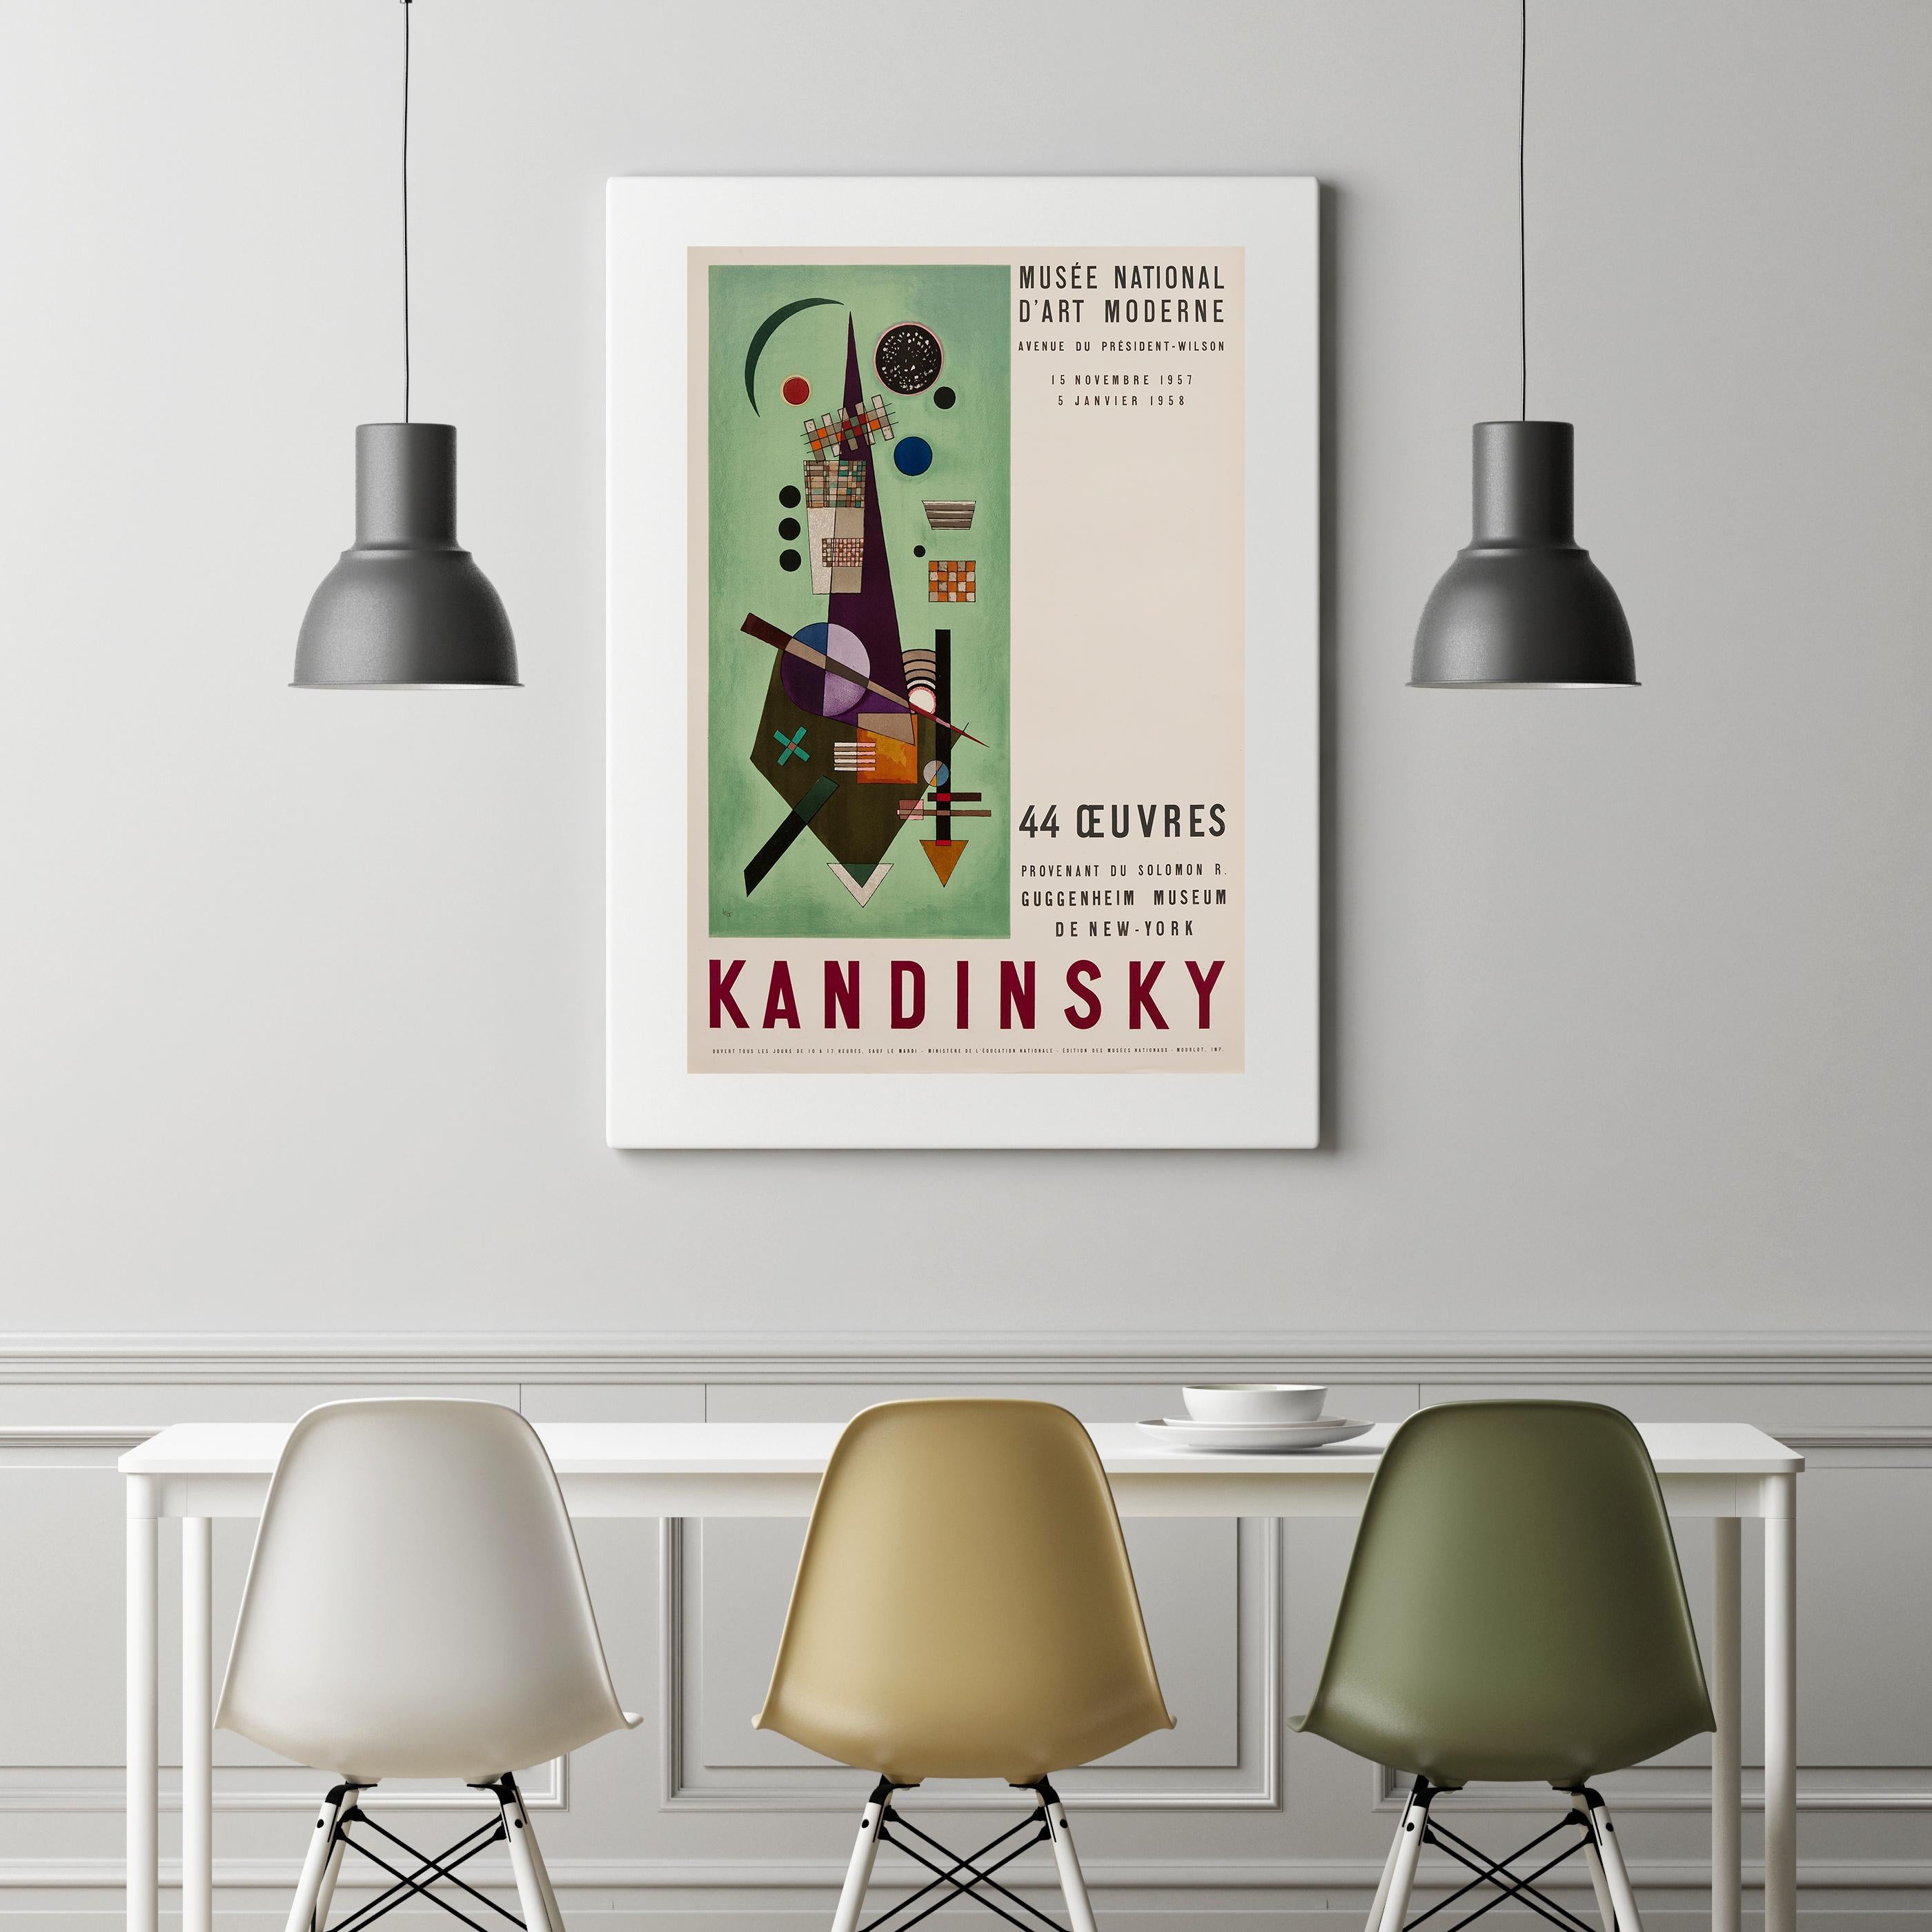 This rare lithographic poster was printed in 1957 at the Atelier Mourlot in Paris. It was created to promote an exhibition of artworks by Kandinsky, on loan from the Guggenheim Museum to the National Museum of Modern in Paris. 

Certificate of